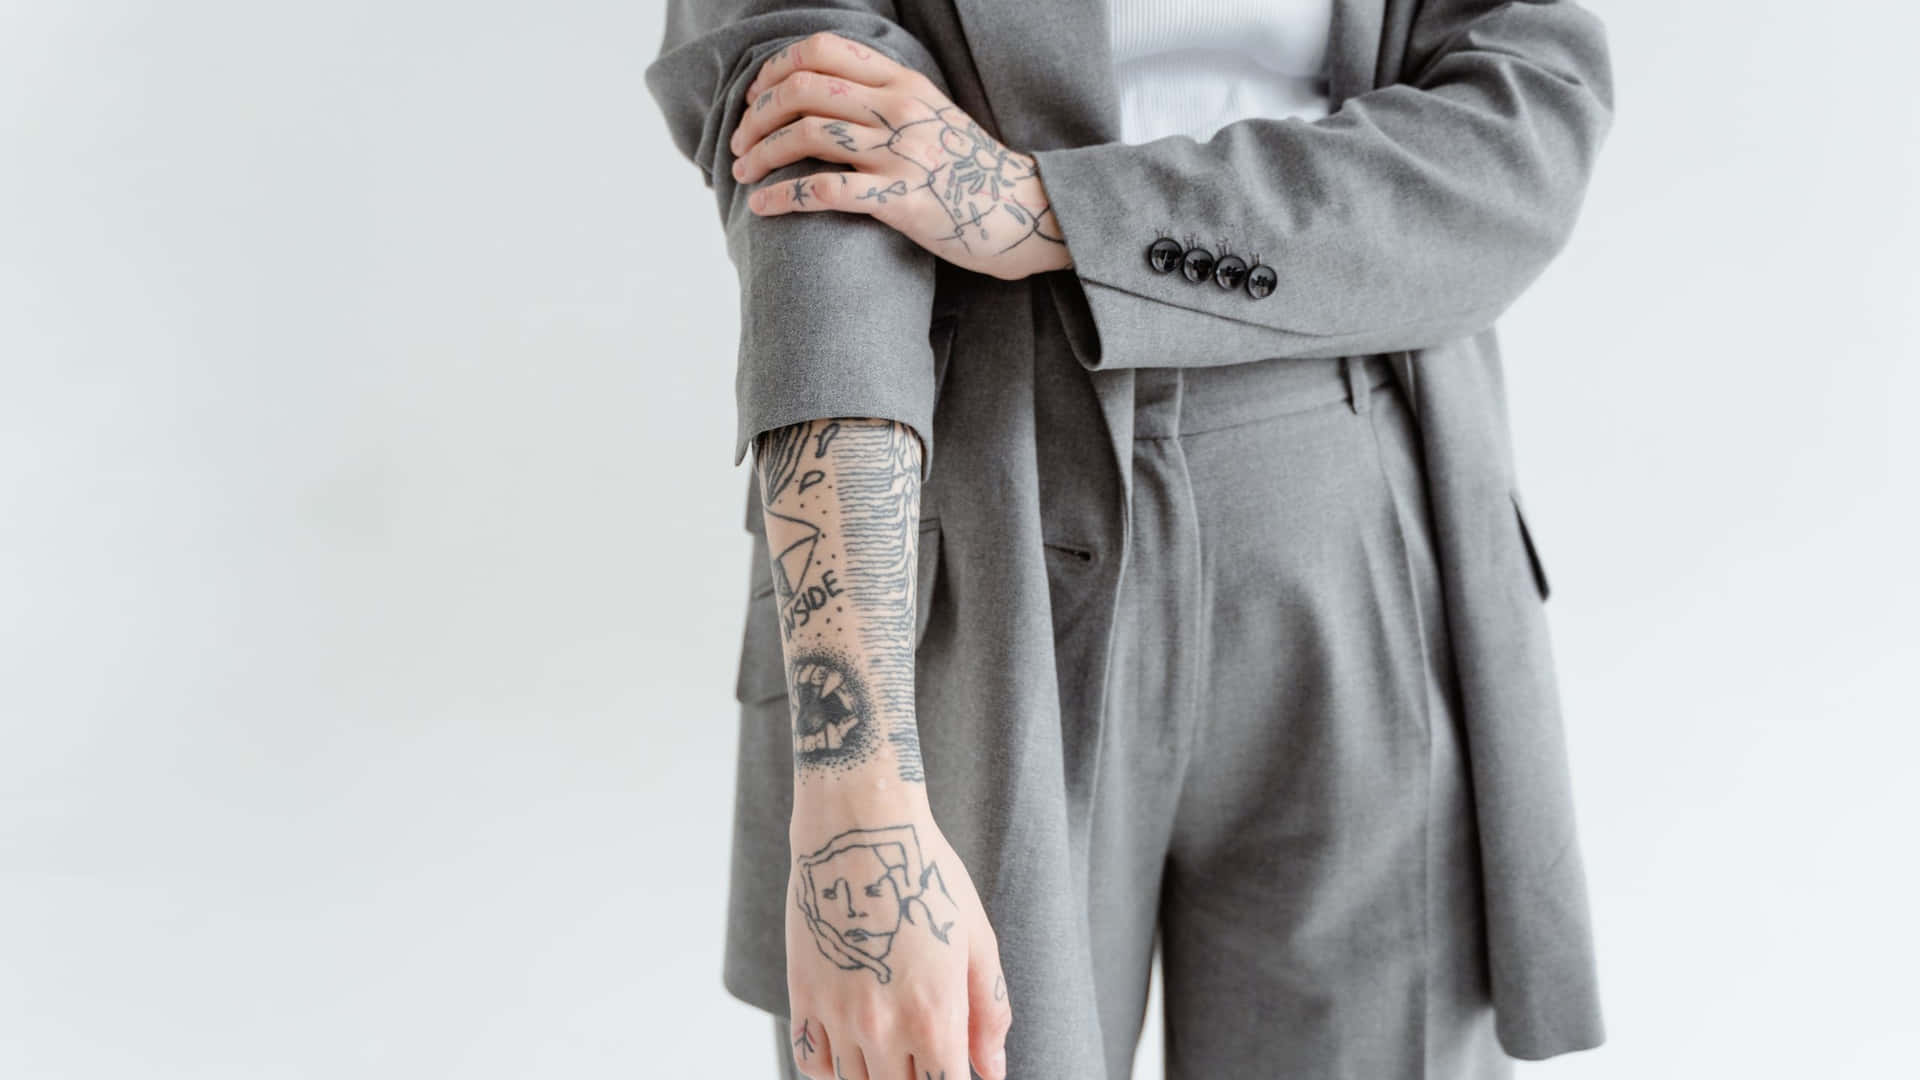 A Woman With Tattoos Wearing A Grey Suit Wallpaper